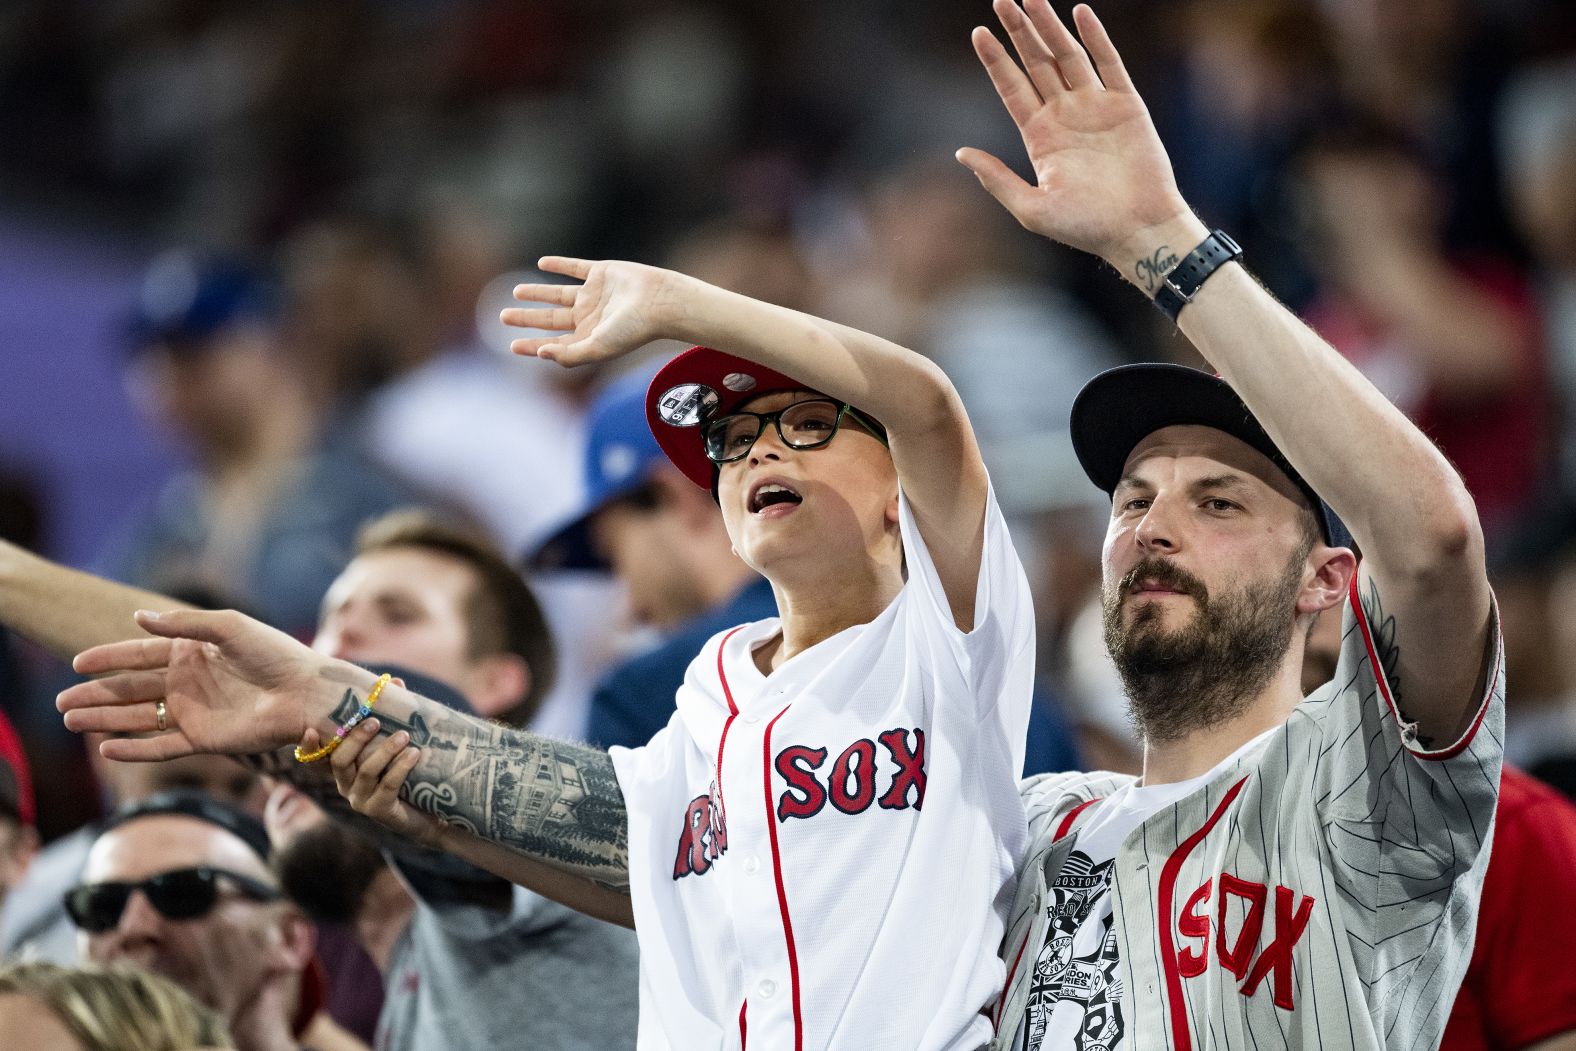 Red Sox fans cheer during game one of the London Series.